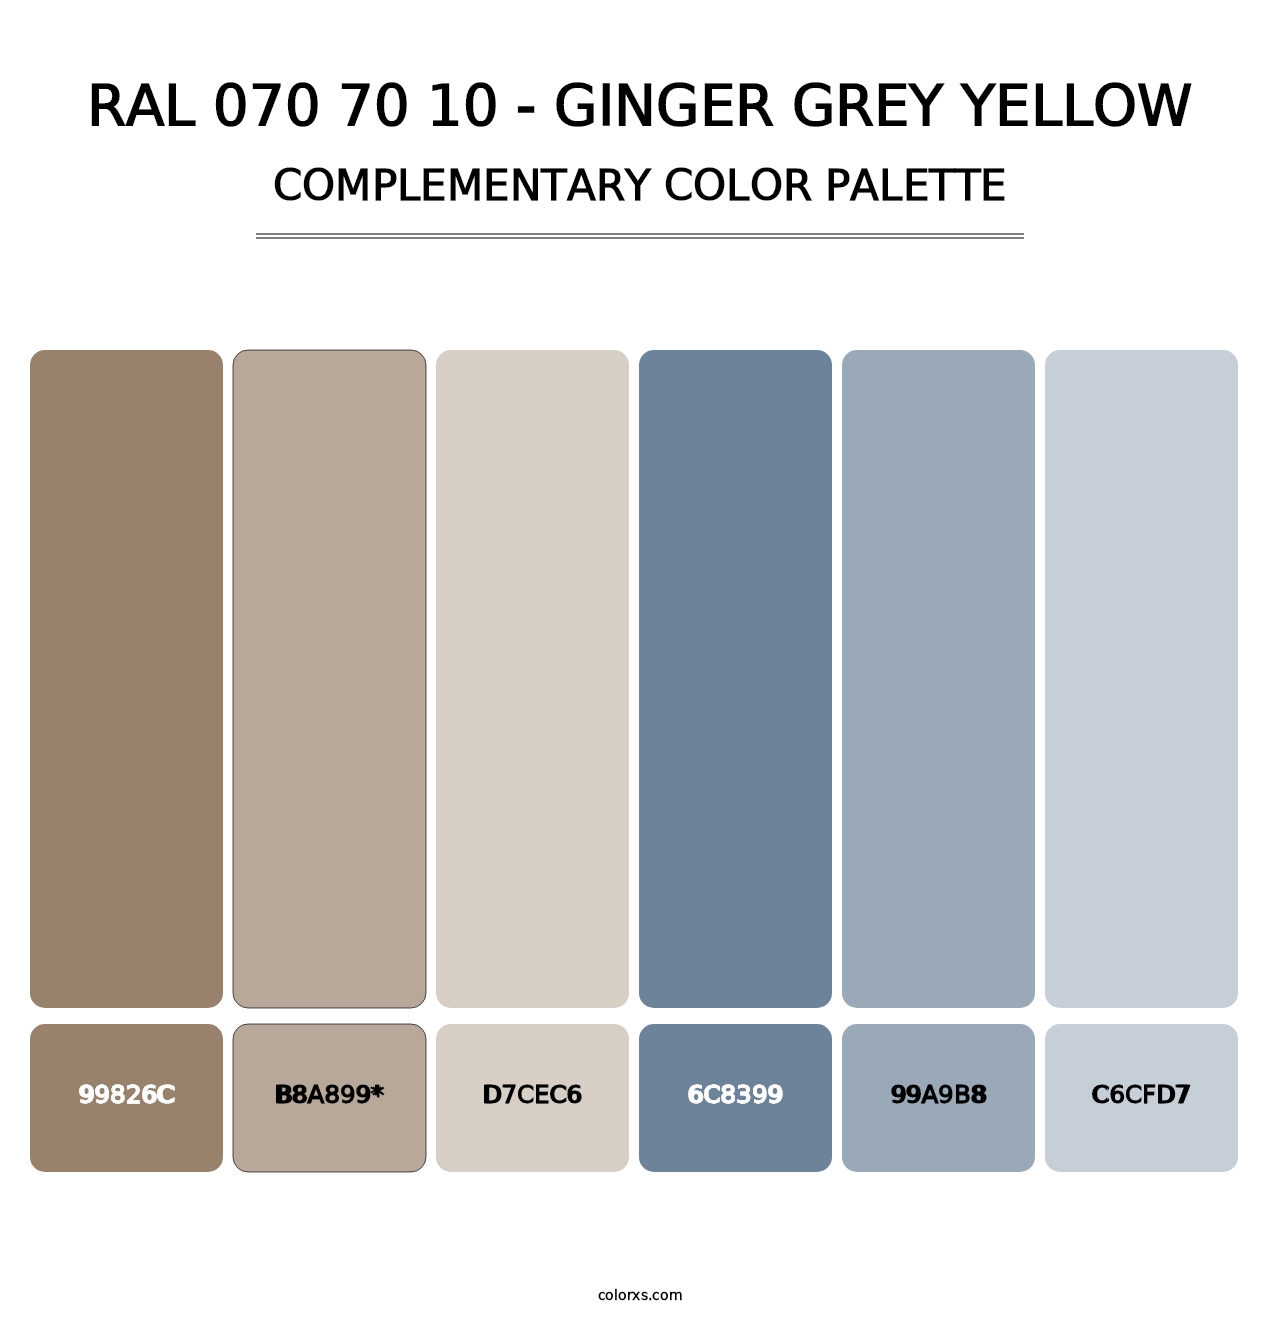 RAL 070 70 10 - Ginger Grey Yellow - Complementary Color Palette